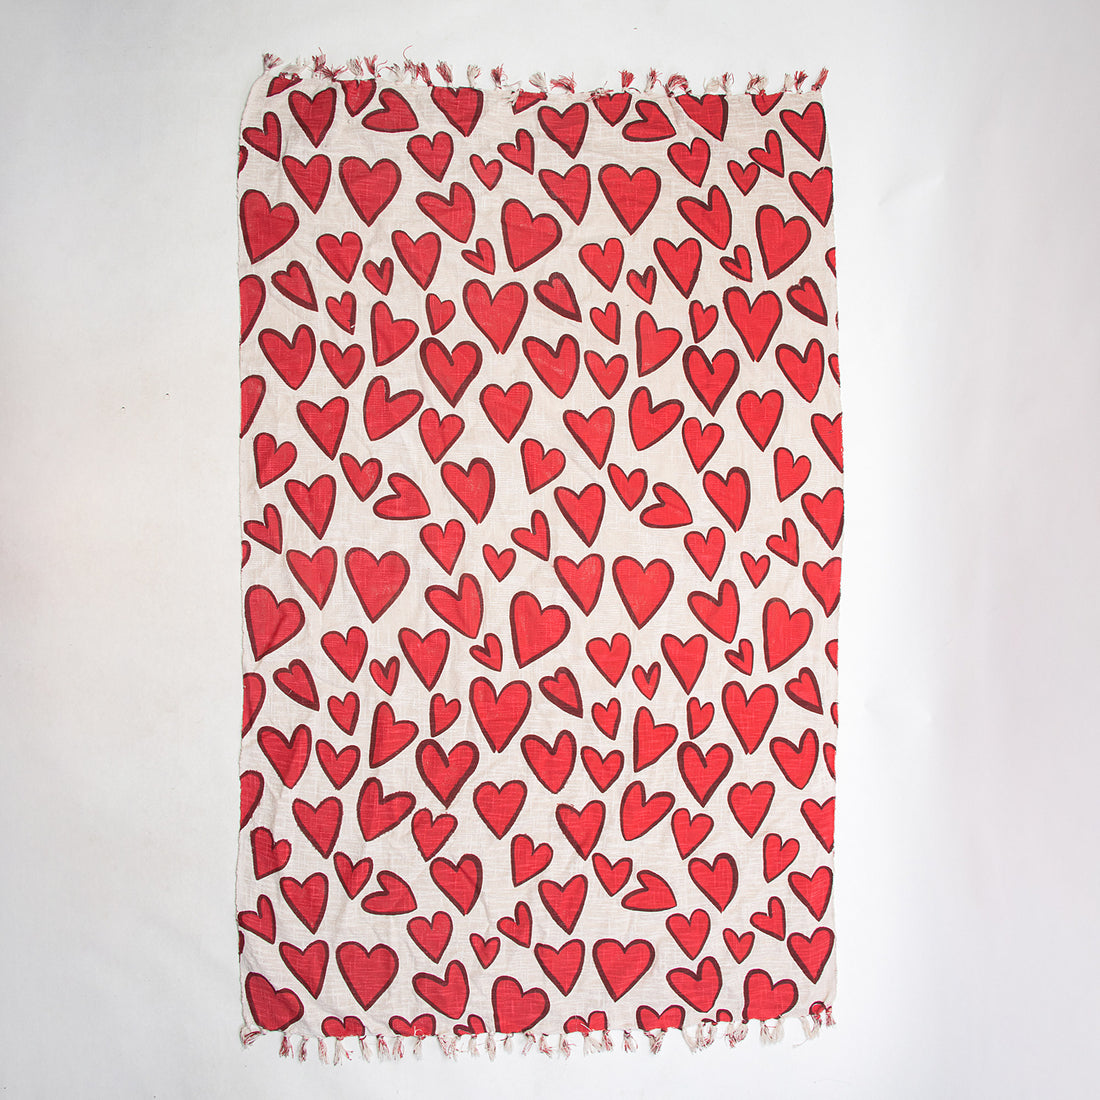 Red Heart Design Soft Cotton Hand Block Printed Sofa Throws